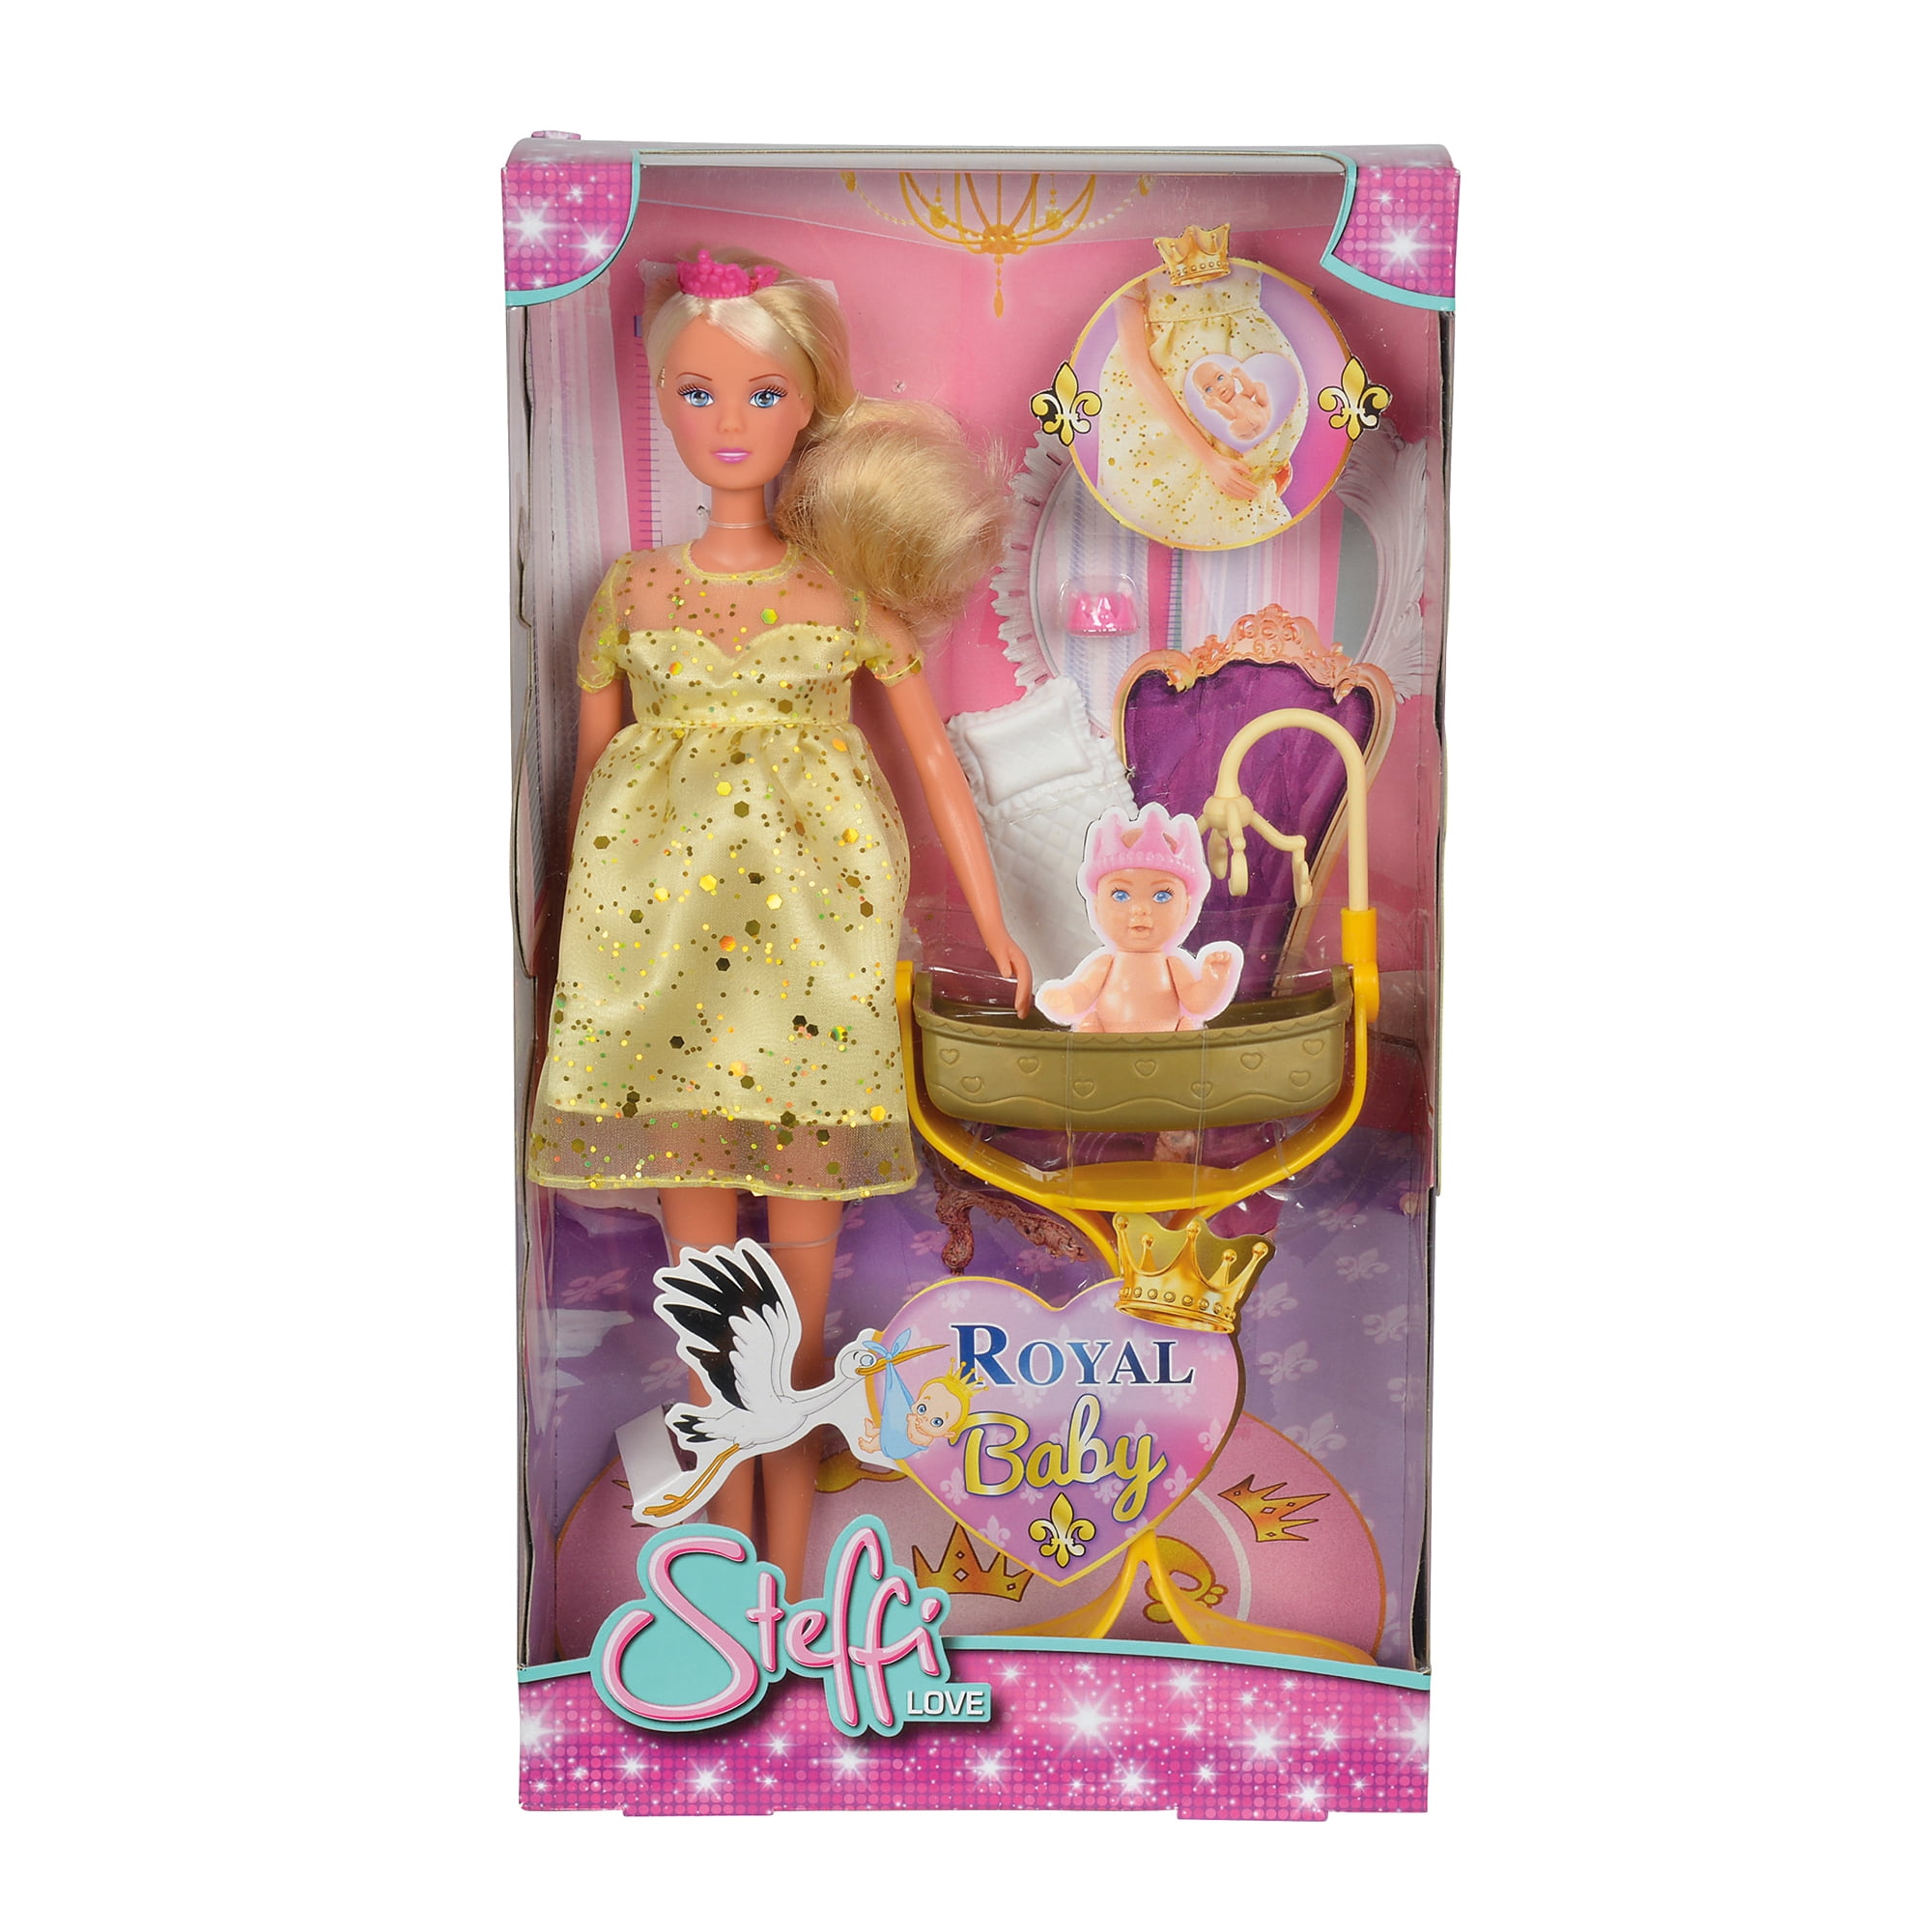 Steffi Love Babysitter Doll With Accessories Durable Safe Playset For Girls NEW 